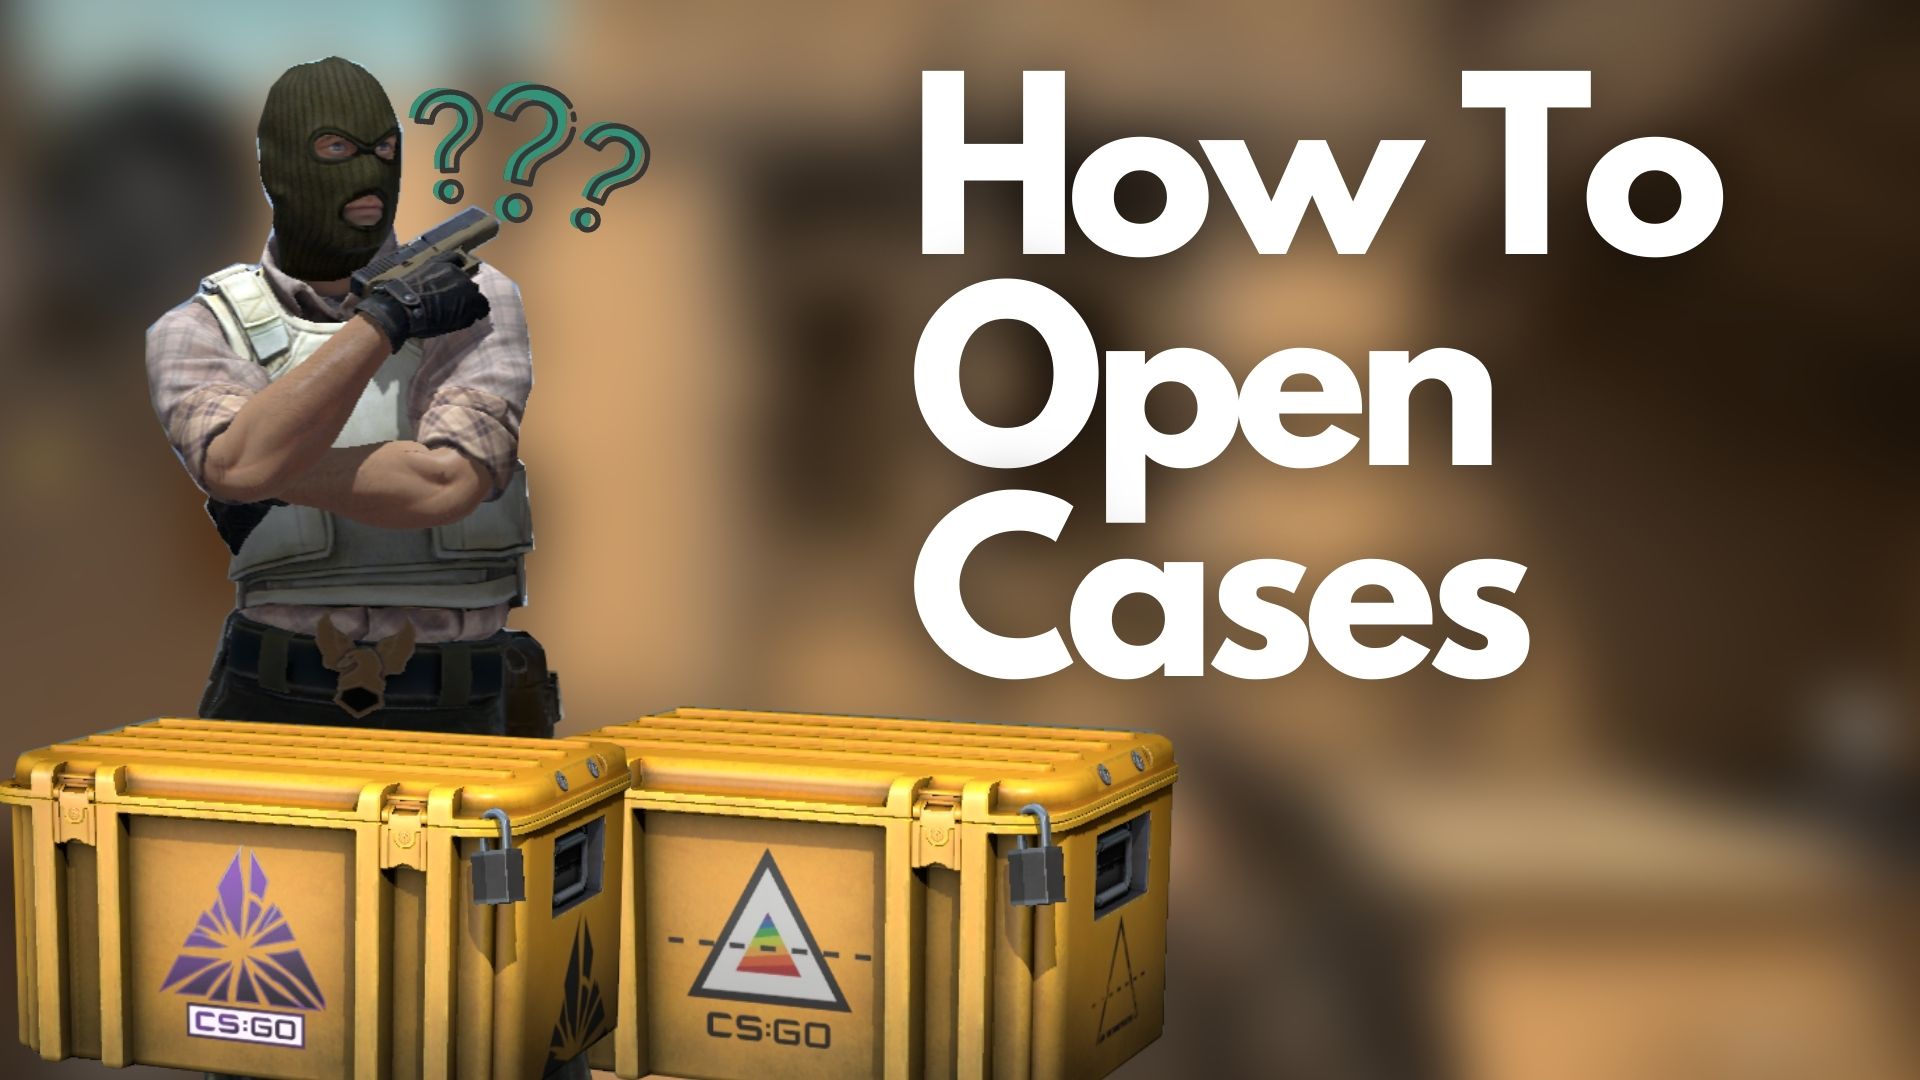 Admin Rotten sand How to Open Cases in Counter-Strike: Global Offensive